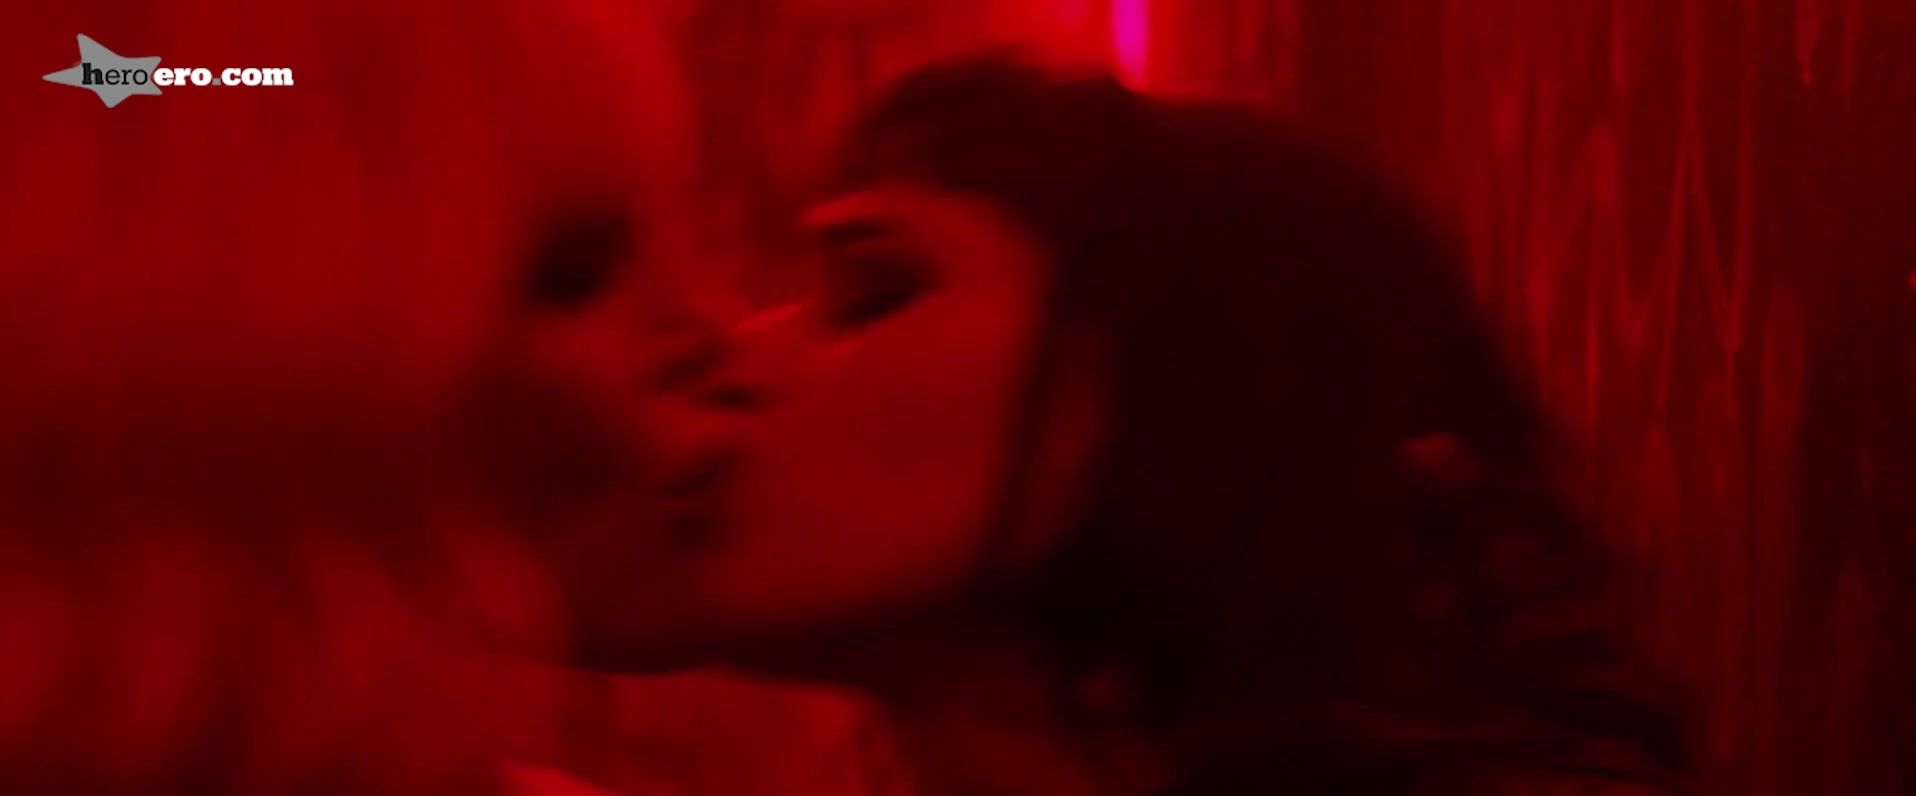 Hard Porn Charlize Theron, Sofia Boutella Nude - Atomic Blonde (US 2017) Eating Pussy